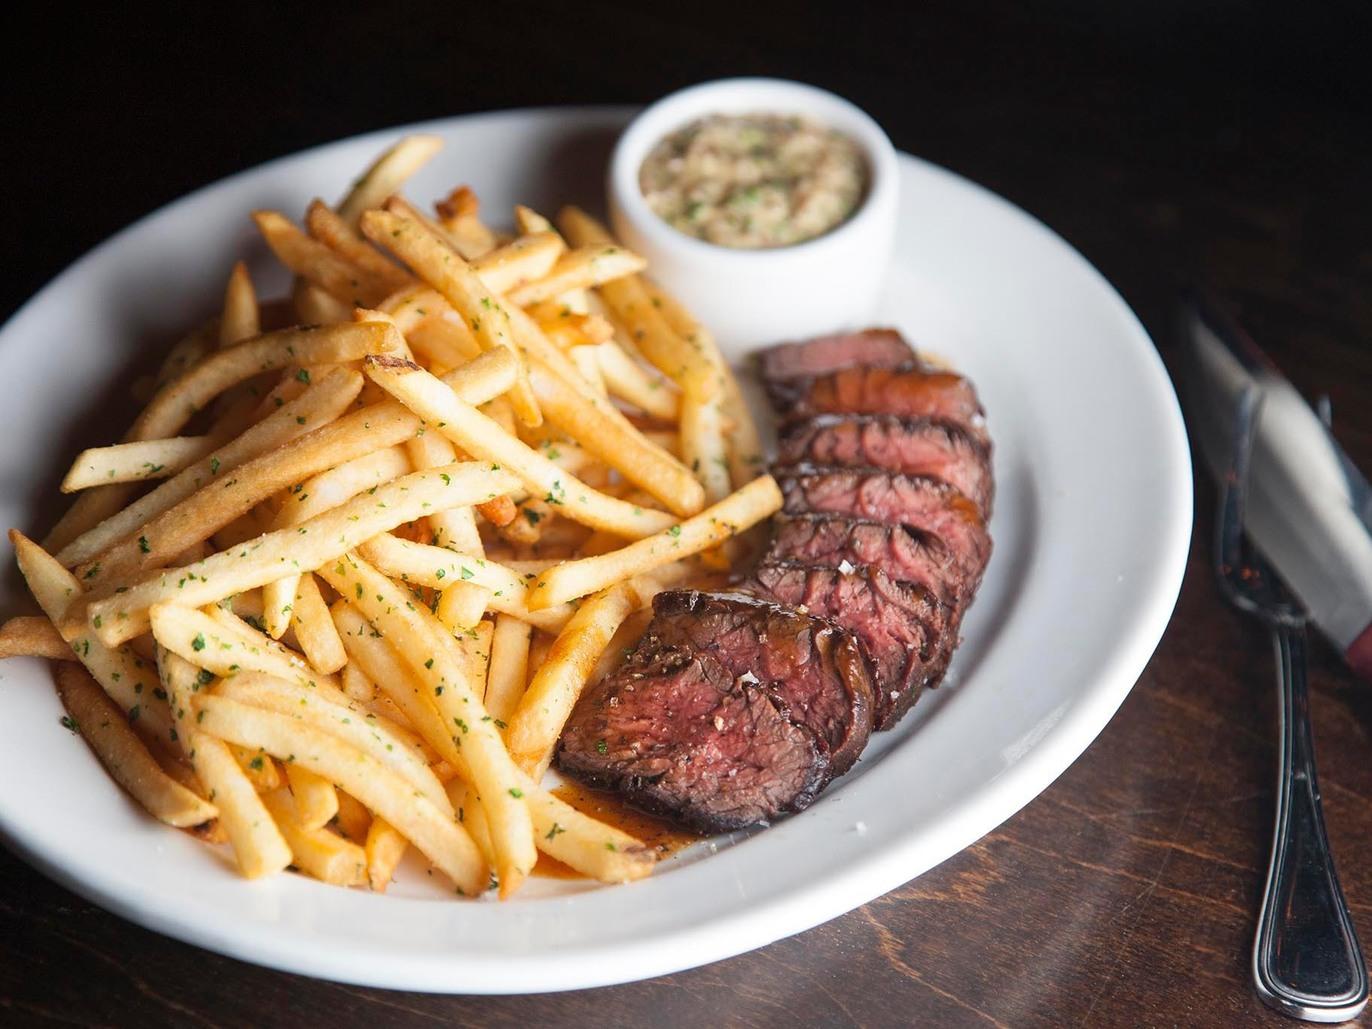 The best steak frites dishes in Los Angeles